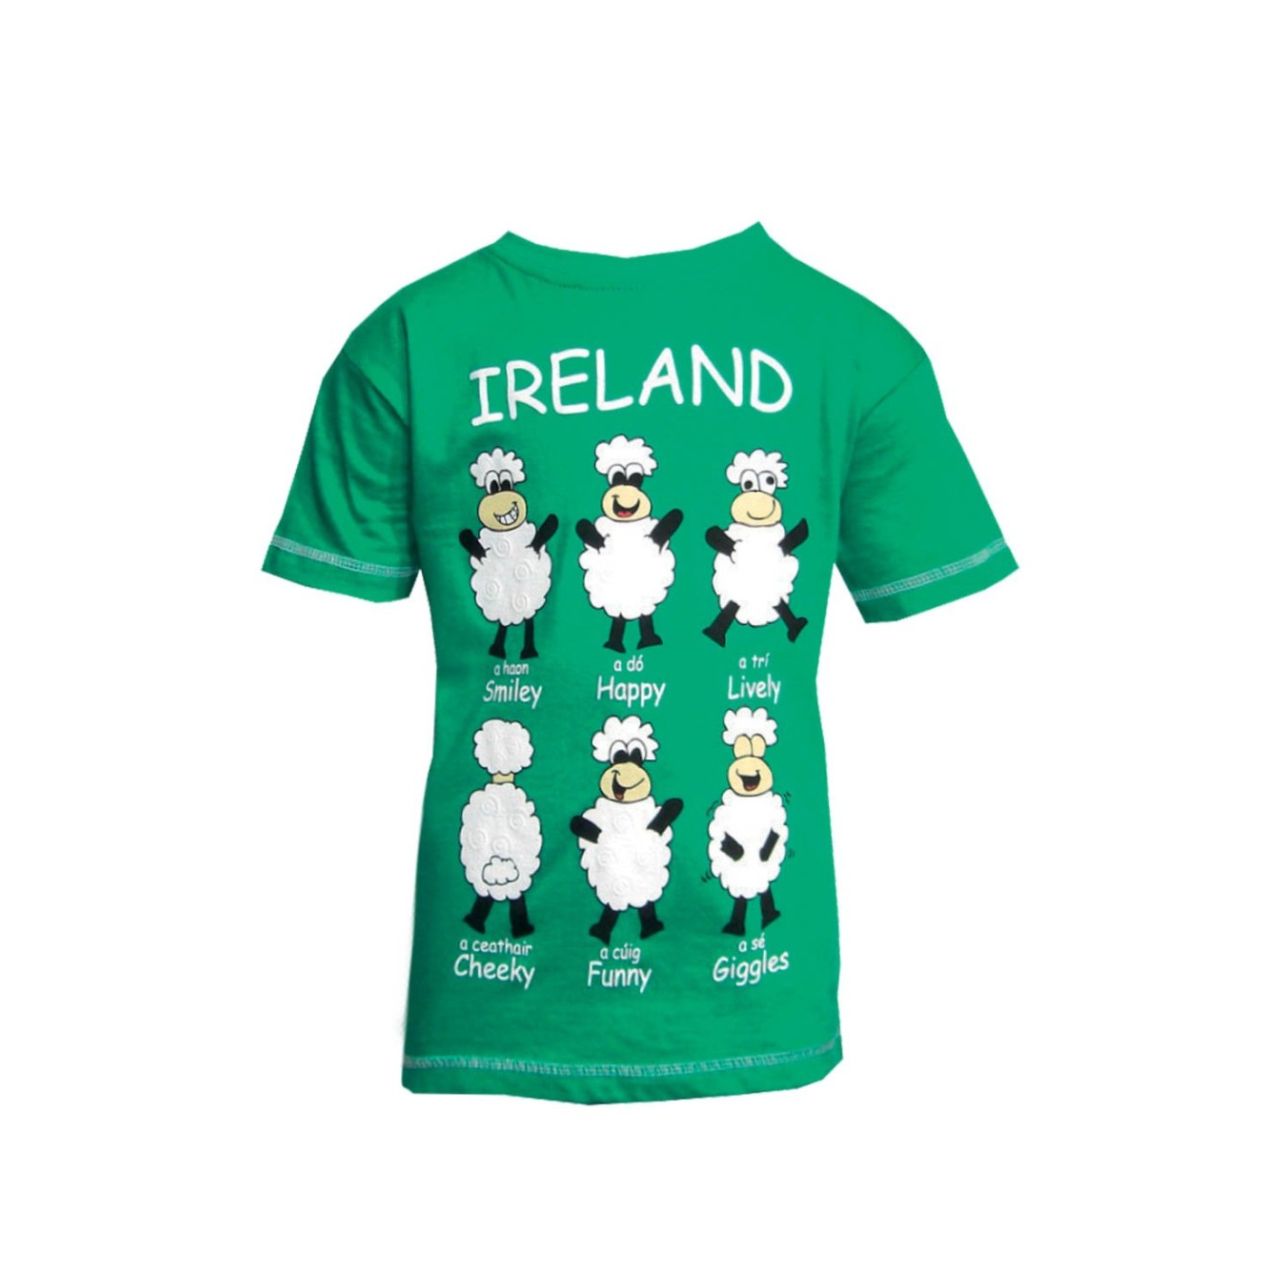 This emerald green cotton kids T-shirt is a part of the Traditional Craft Official Collection. It is a relaxed fit and features various different printed "Happy Sheep".